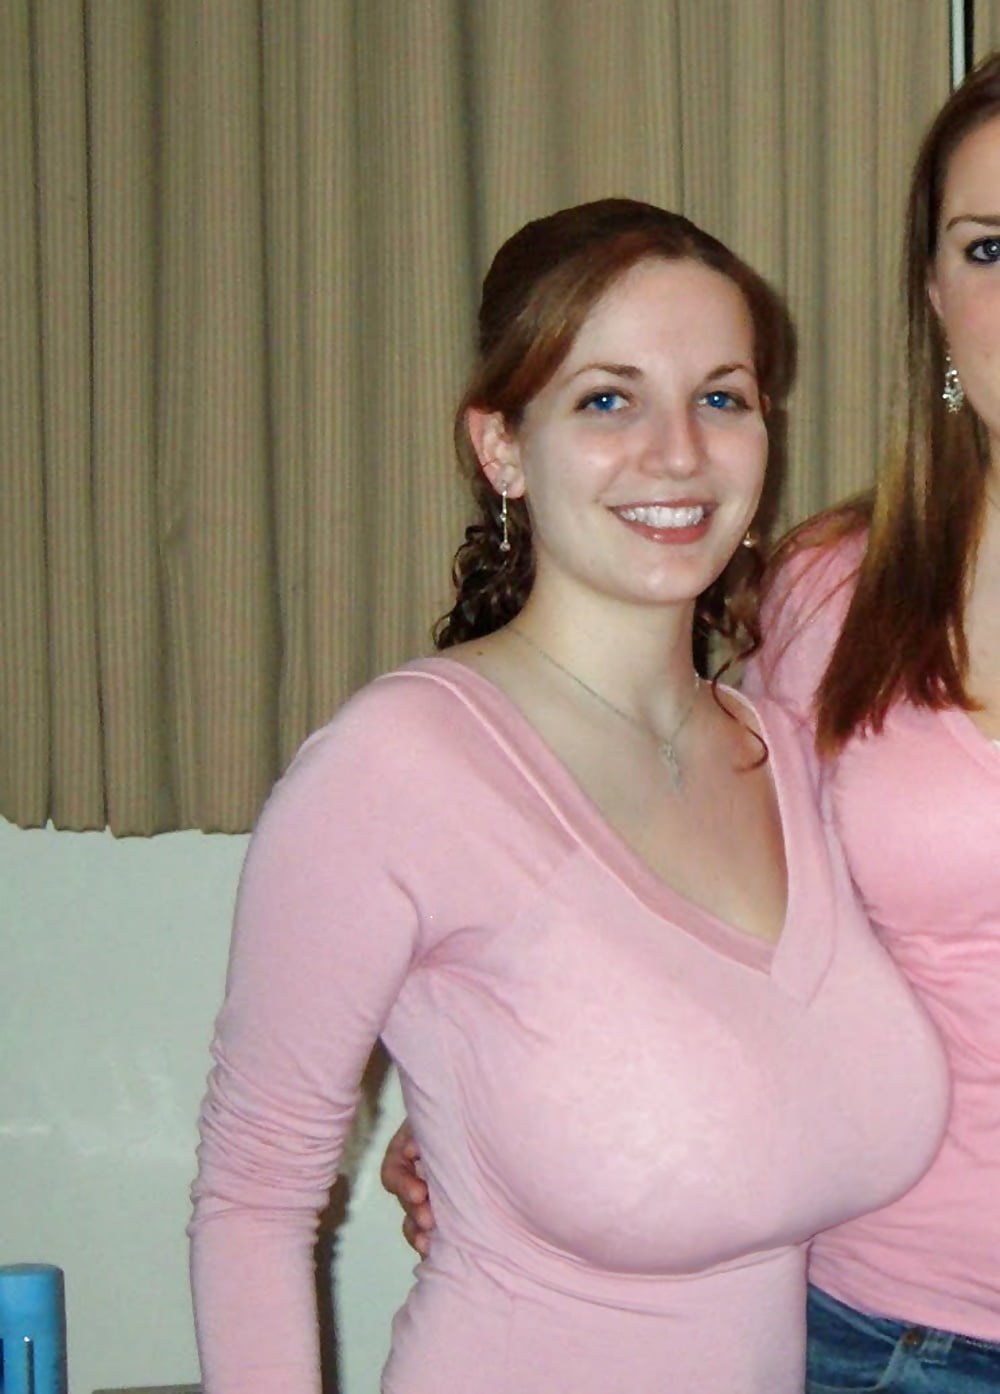 Wife Showed Her Boobs to Her Friends (55 photos)